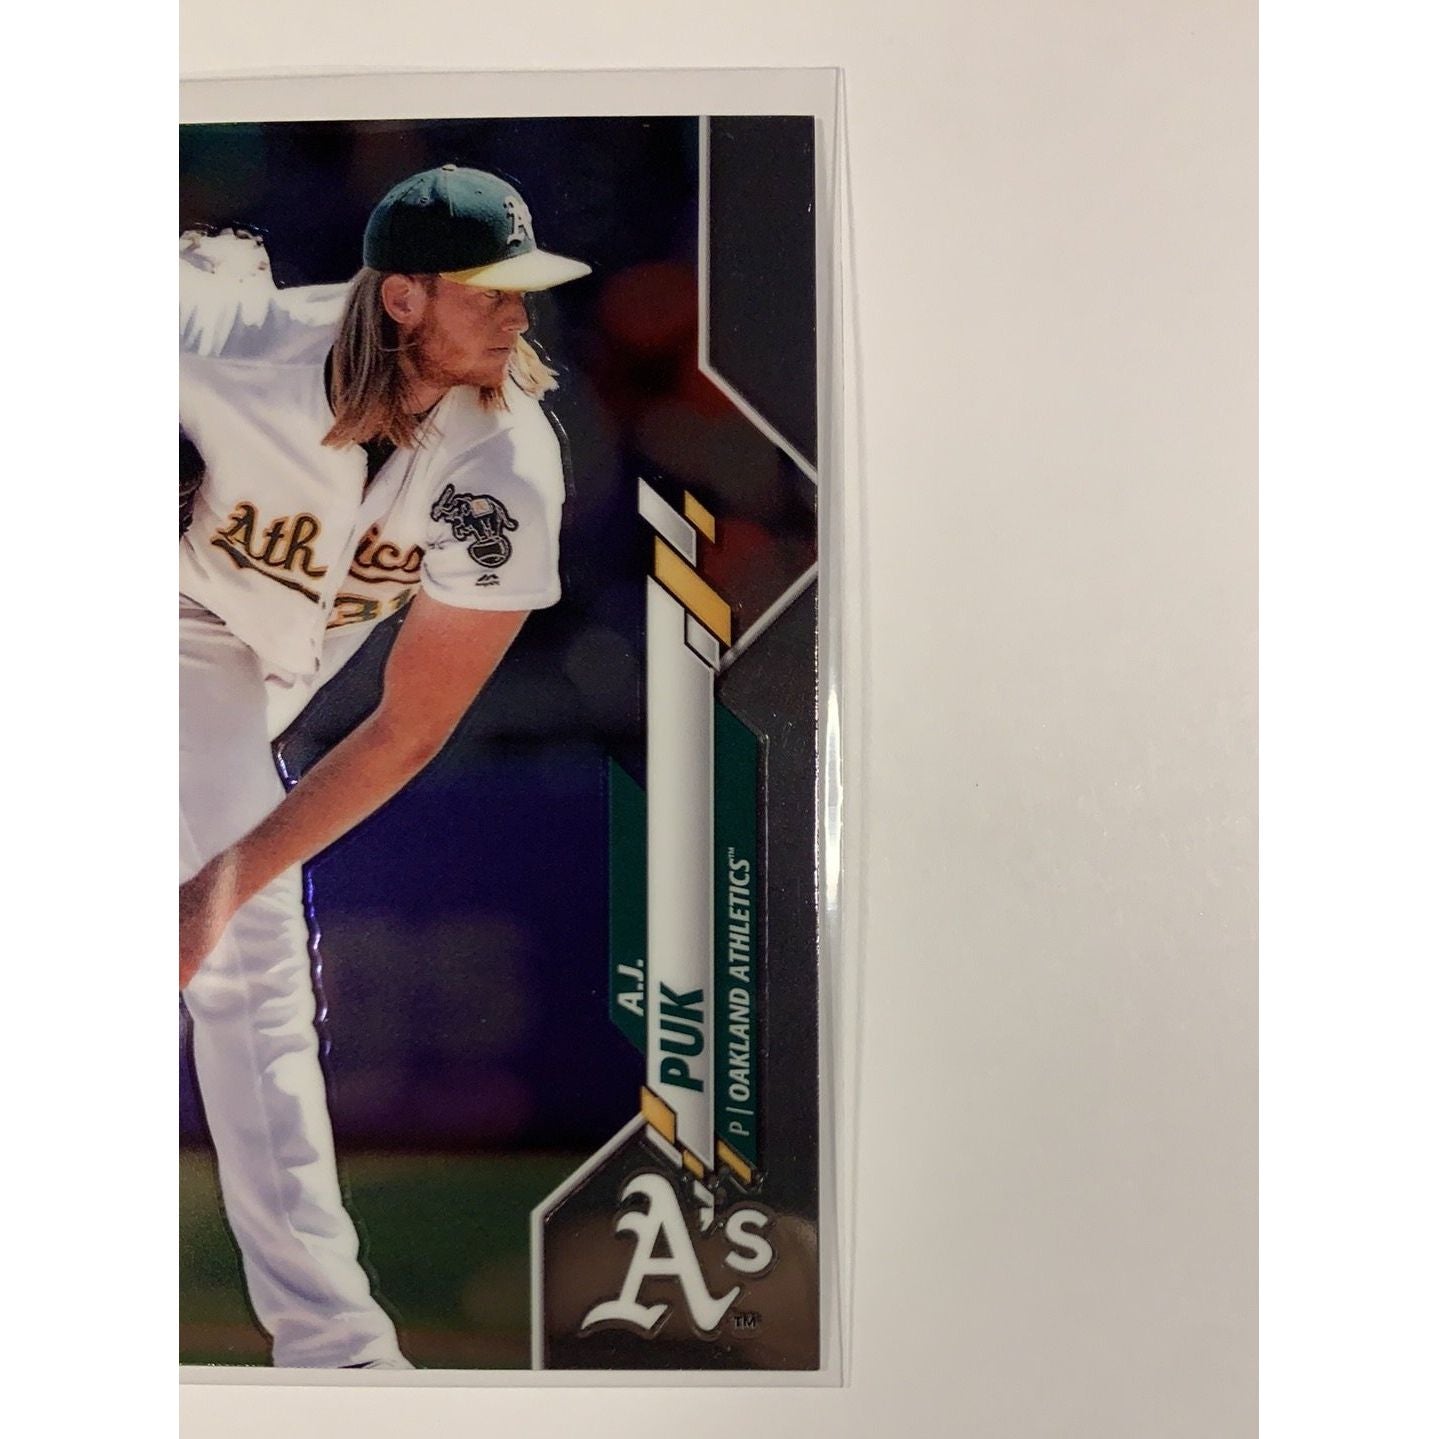  2020 Topps Chrome A.J. Puk RC  Local Legends Cards & Collectibles